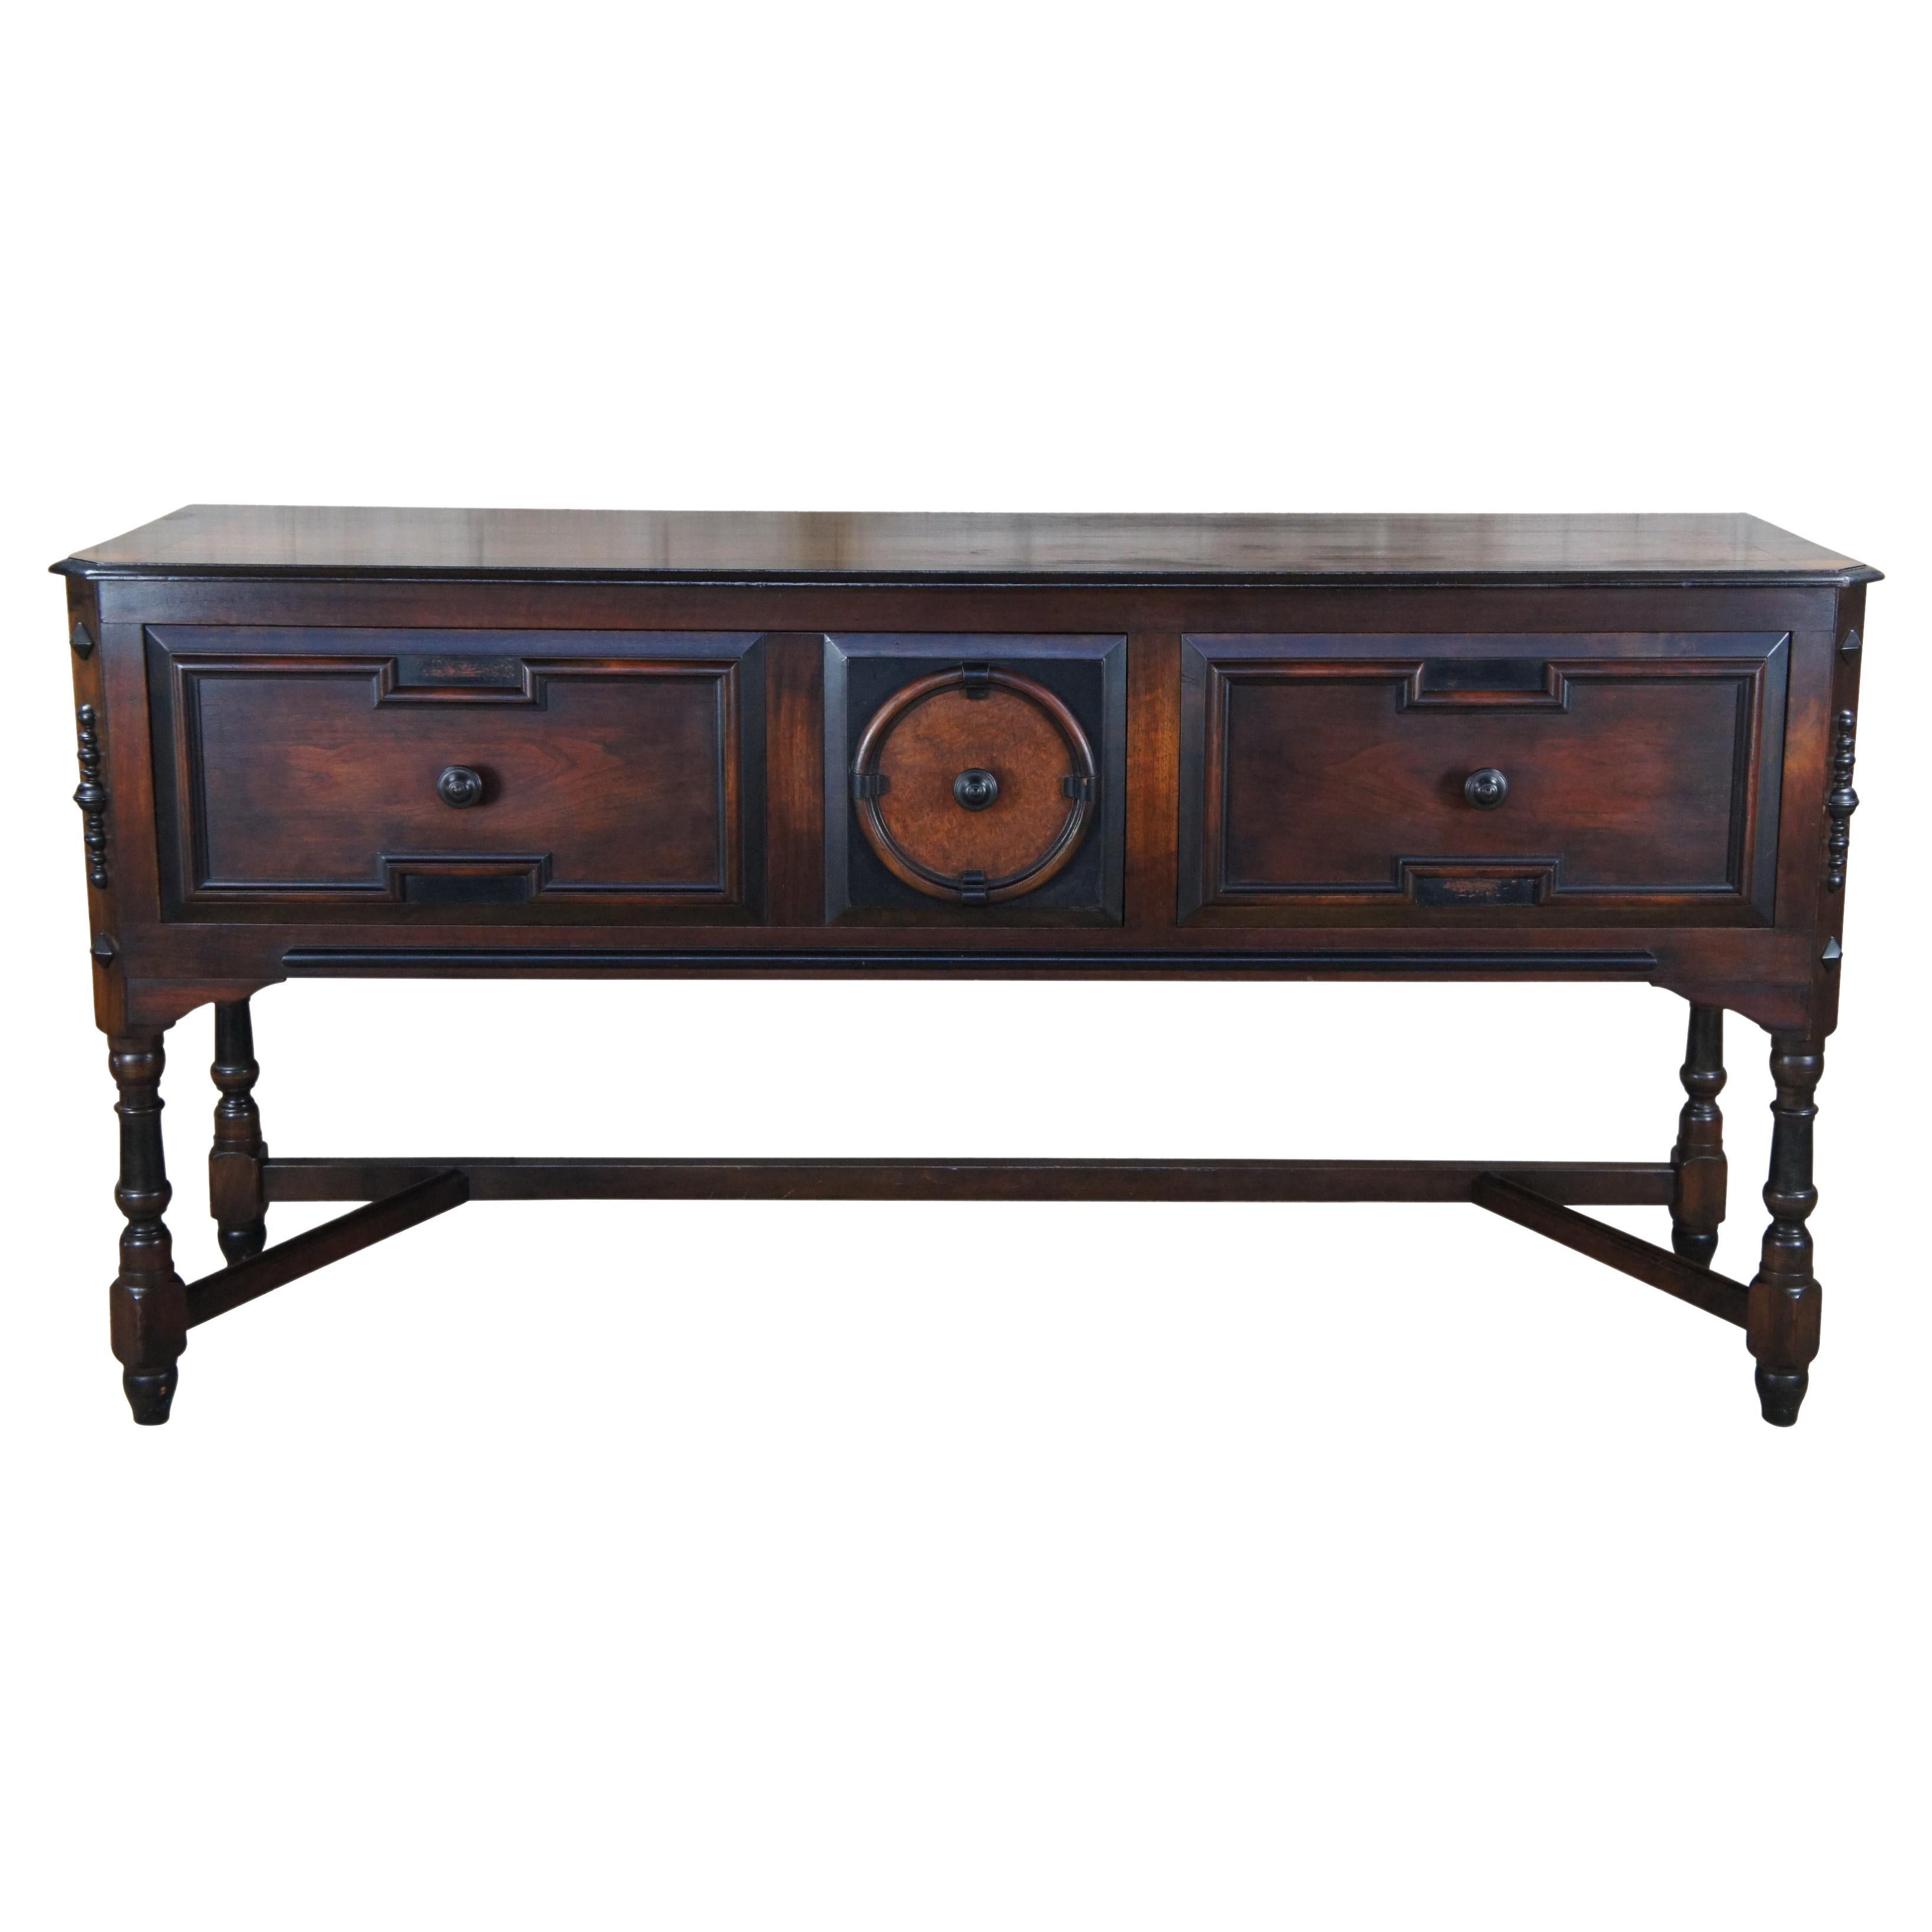 Paine Furniture Victorian Revival Walnut Carved Buffet Server Sideboard Console